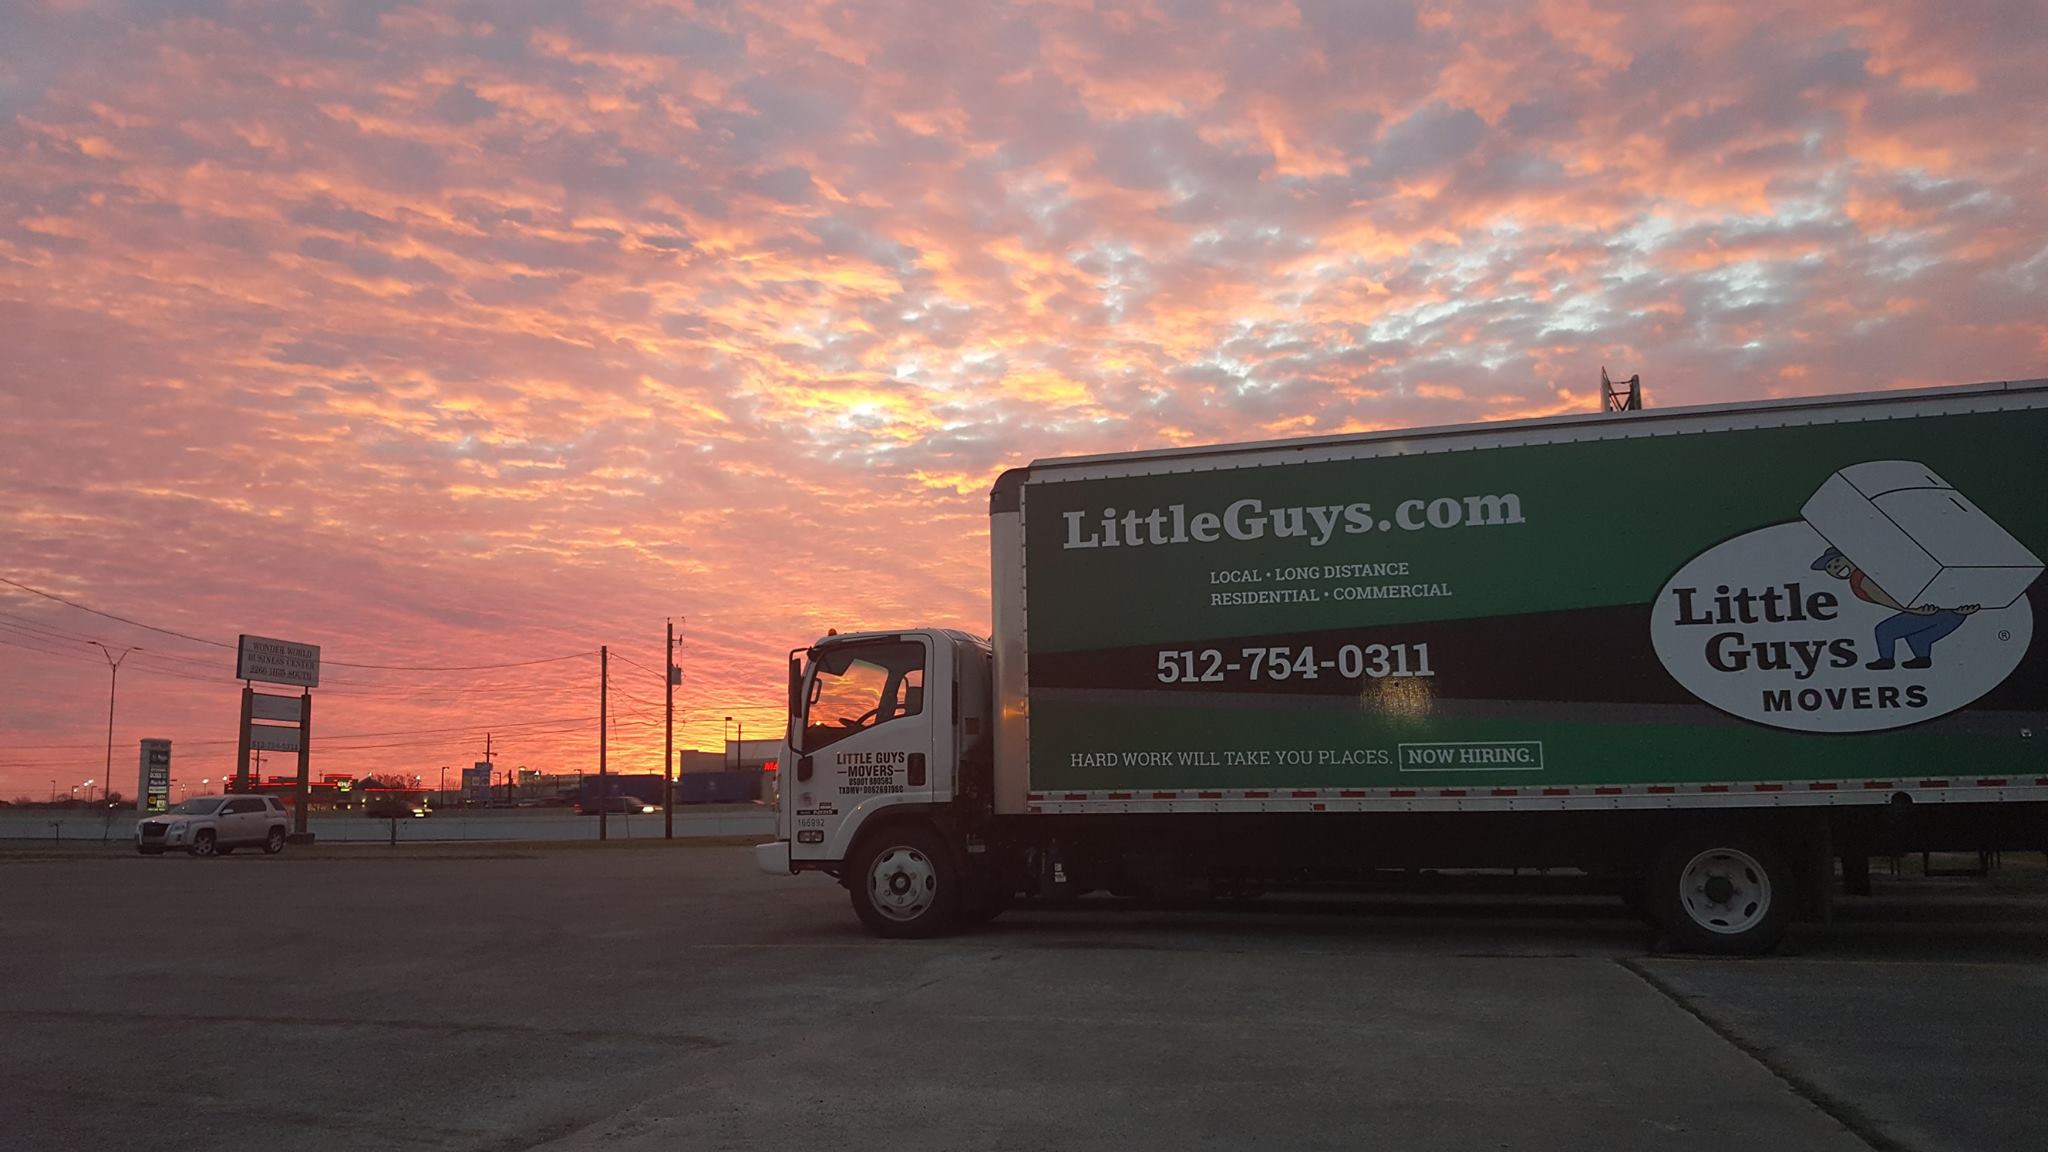 A Little Guys truck parked in a lot during a gorgeous sunset